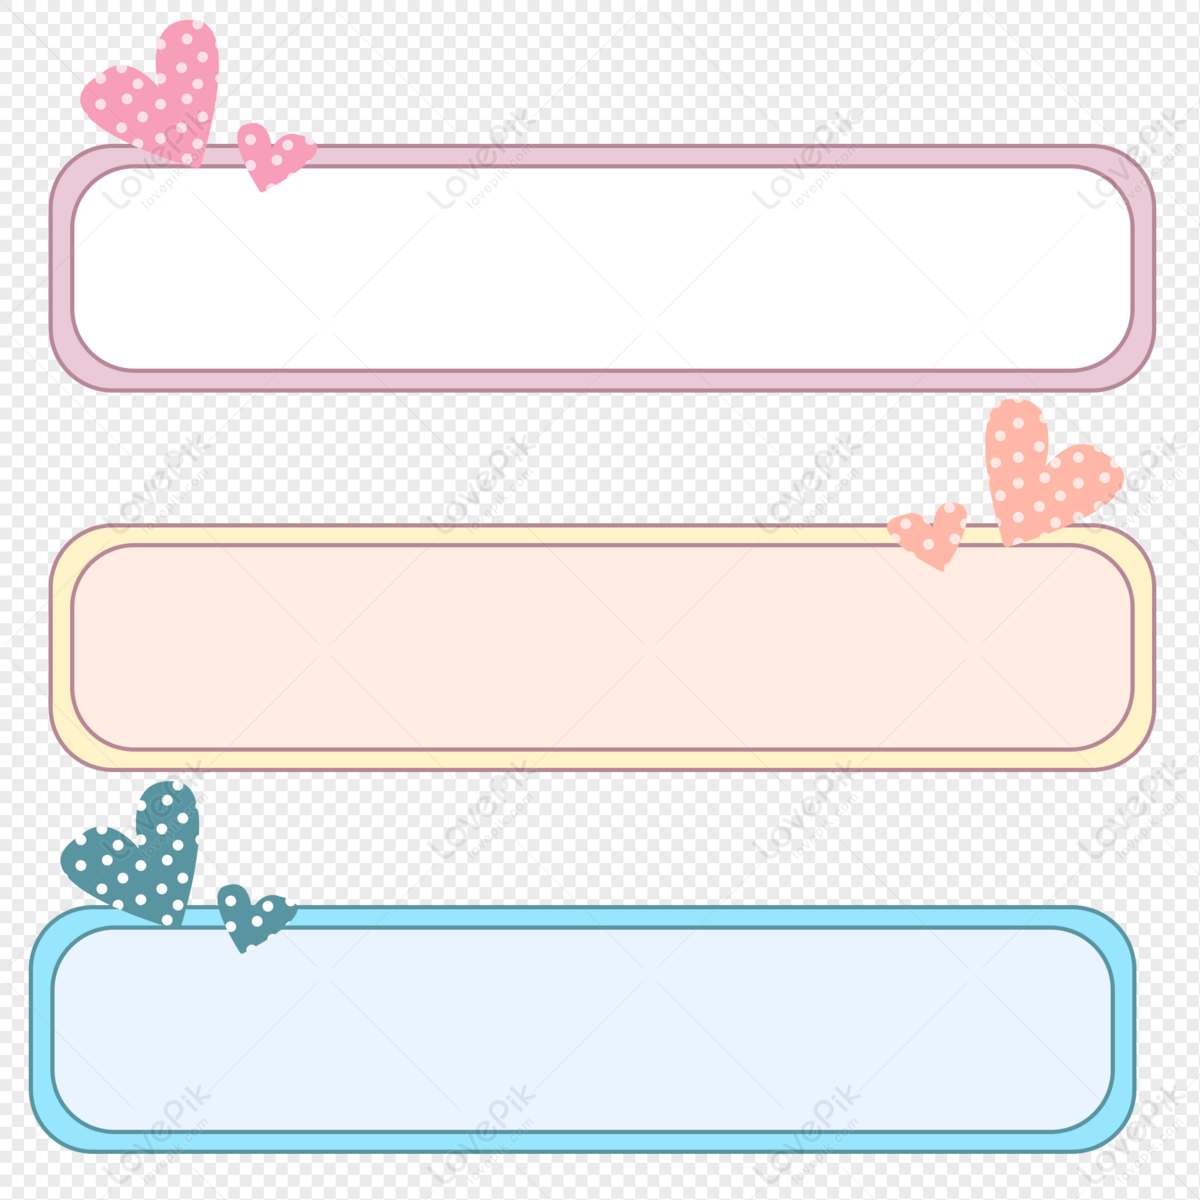 Cute Sticker Box PNG Images With Transparent Background | Free ...